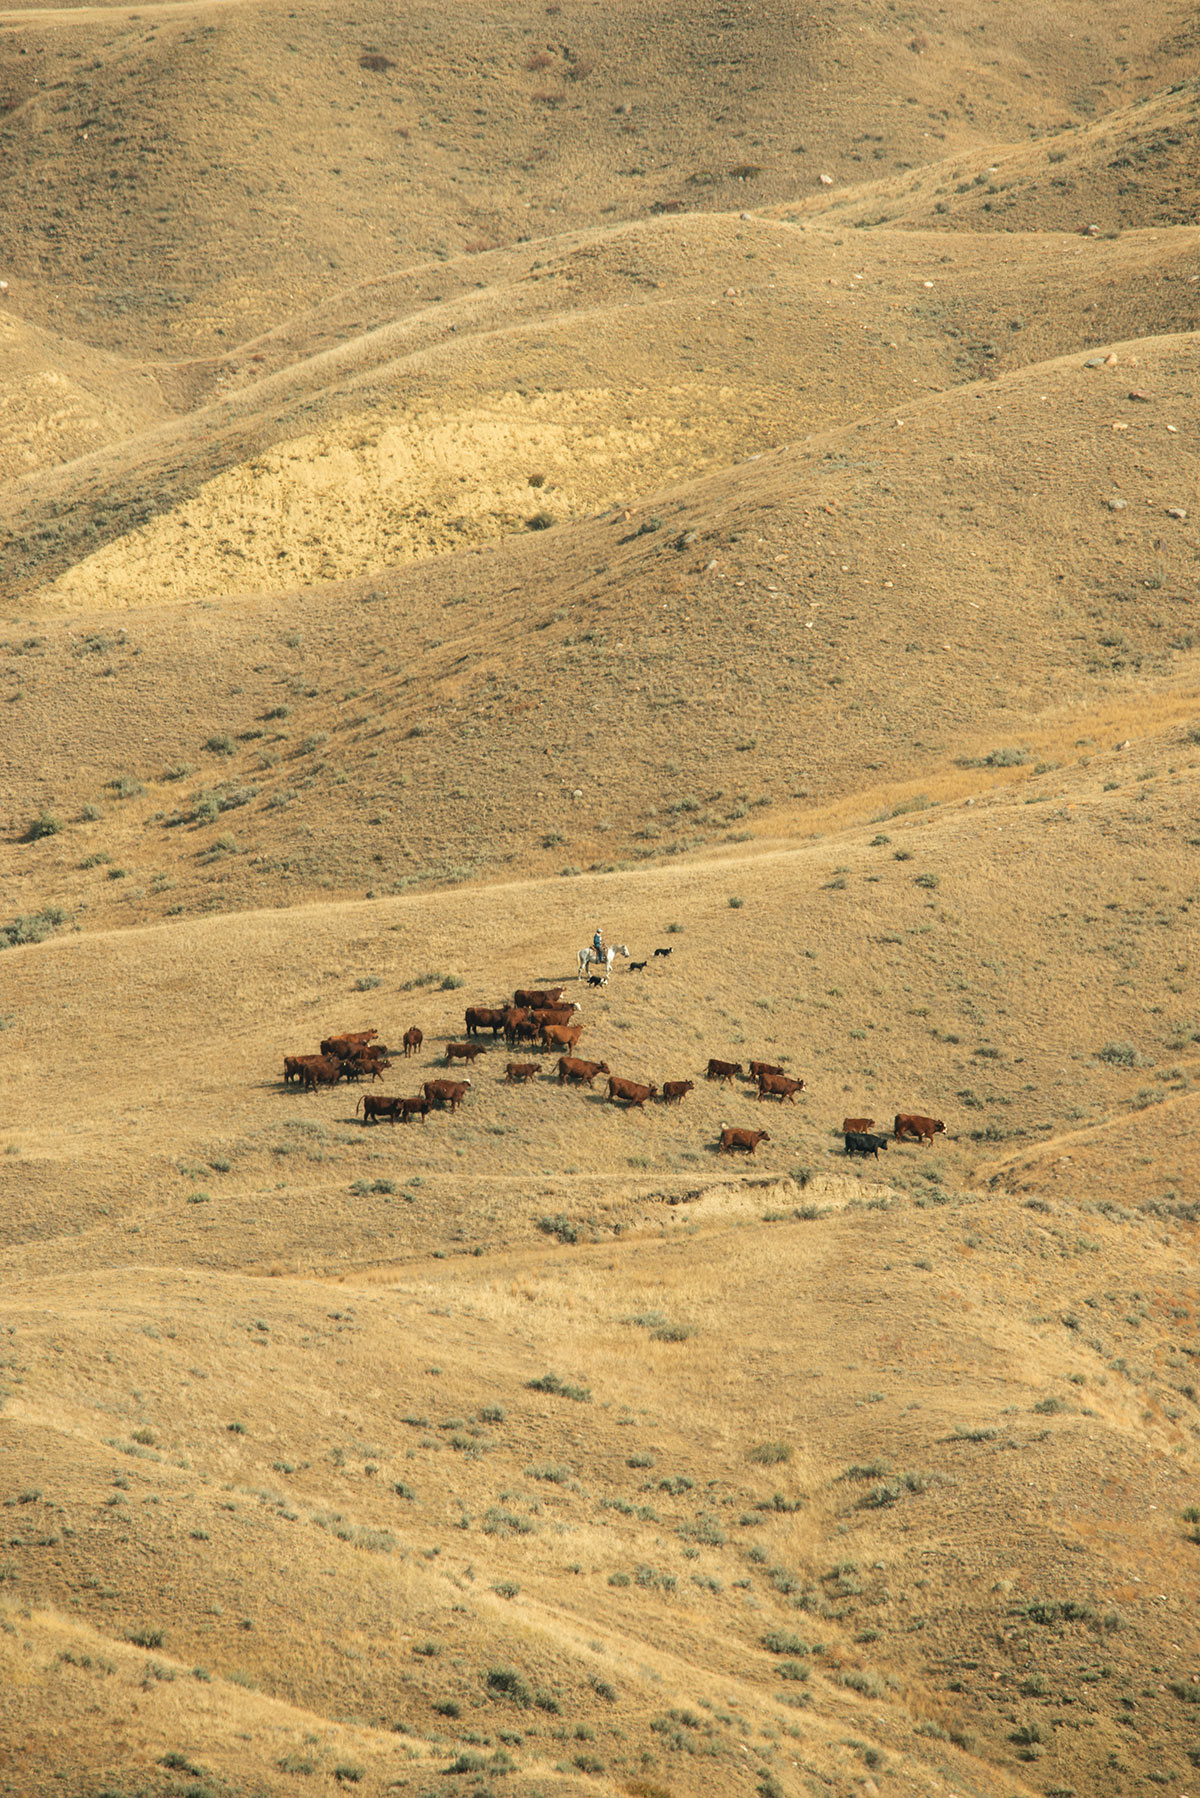 Aerial photo of a person on a white horse near a group of brown cattle. They are in the middle of a hilly yellow area dotted with shrubs